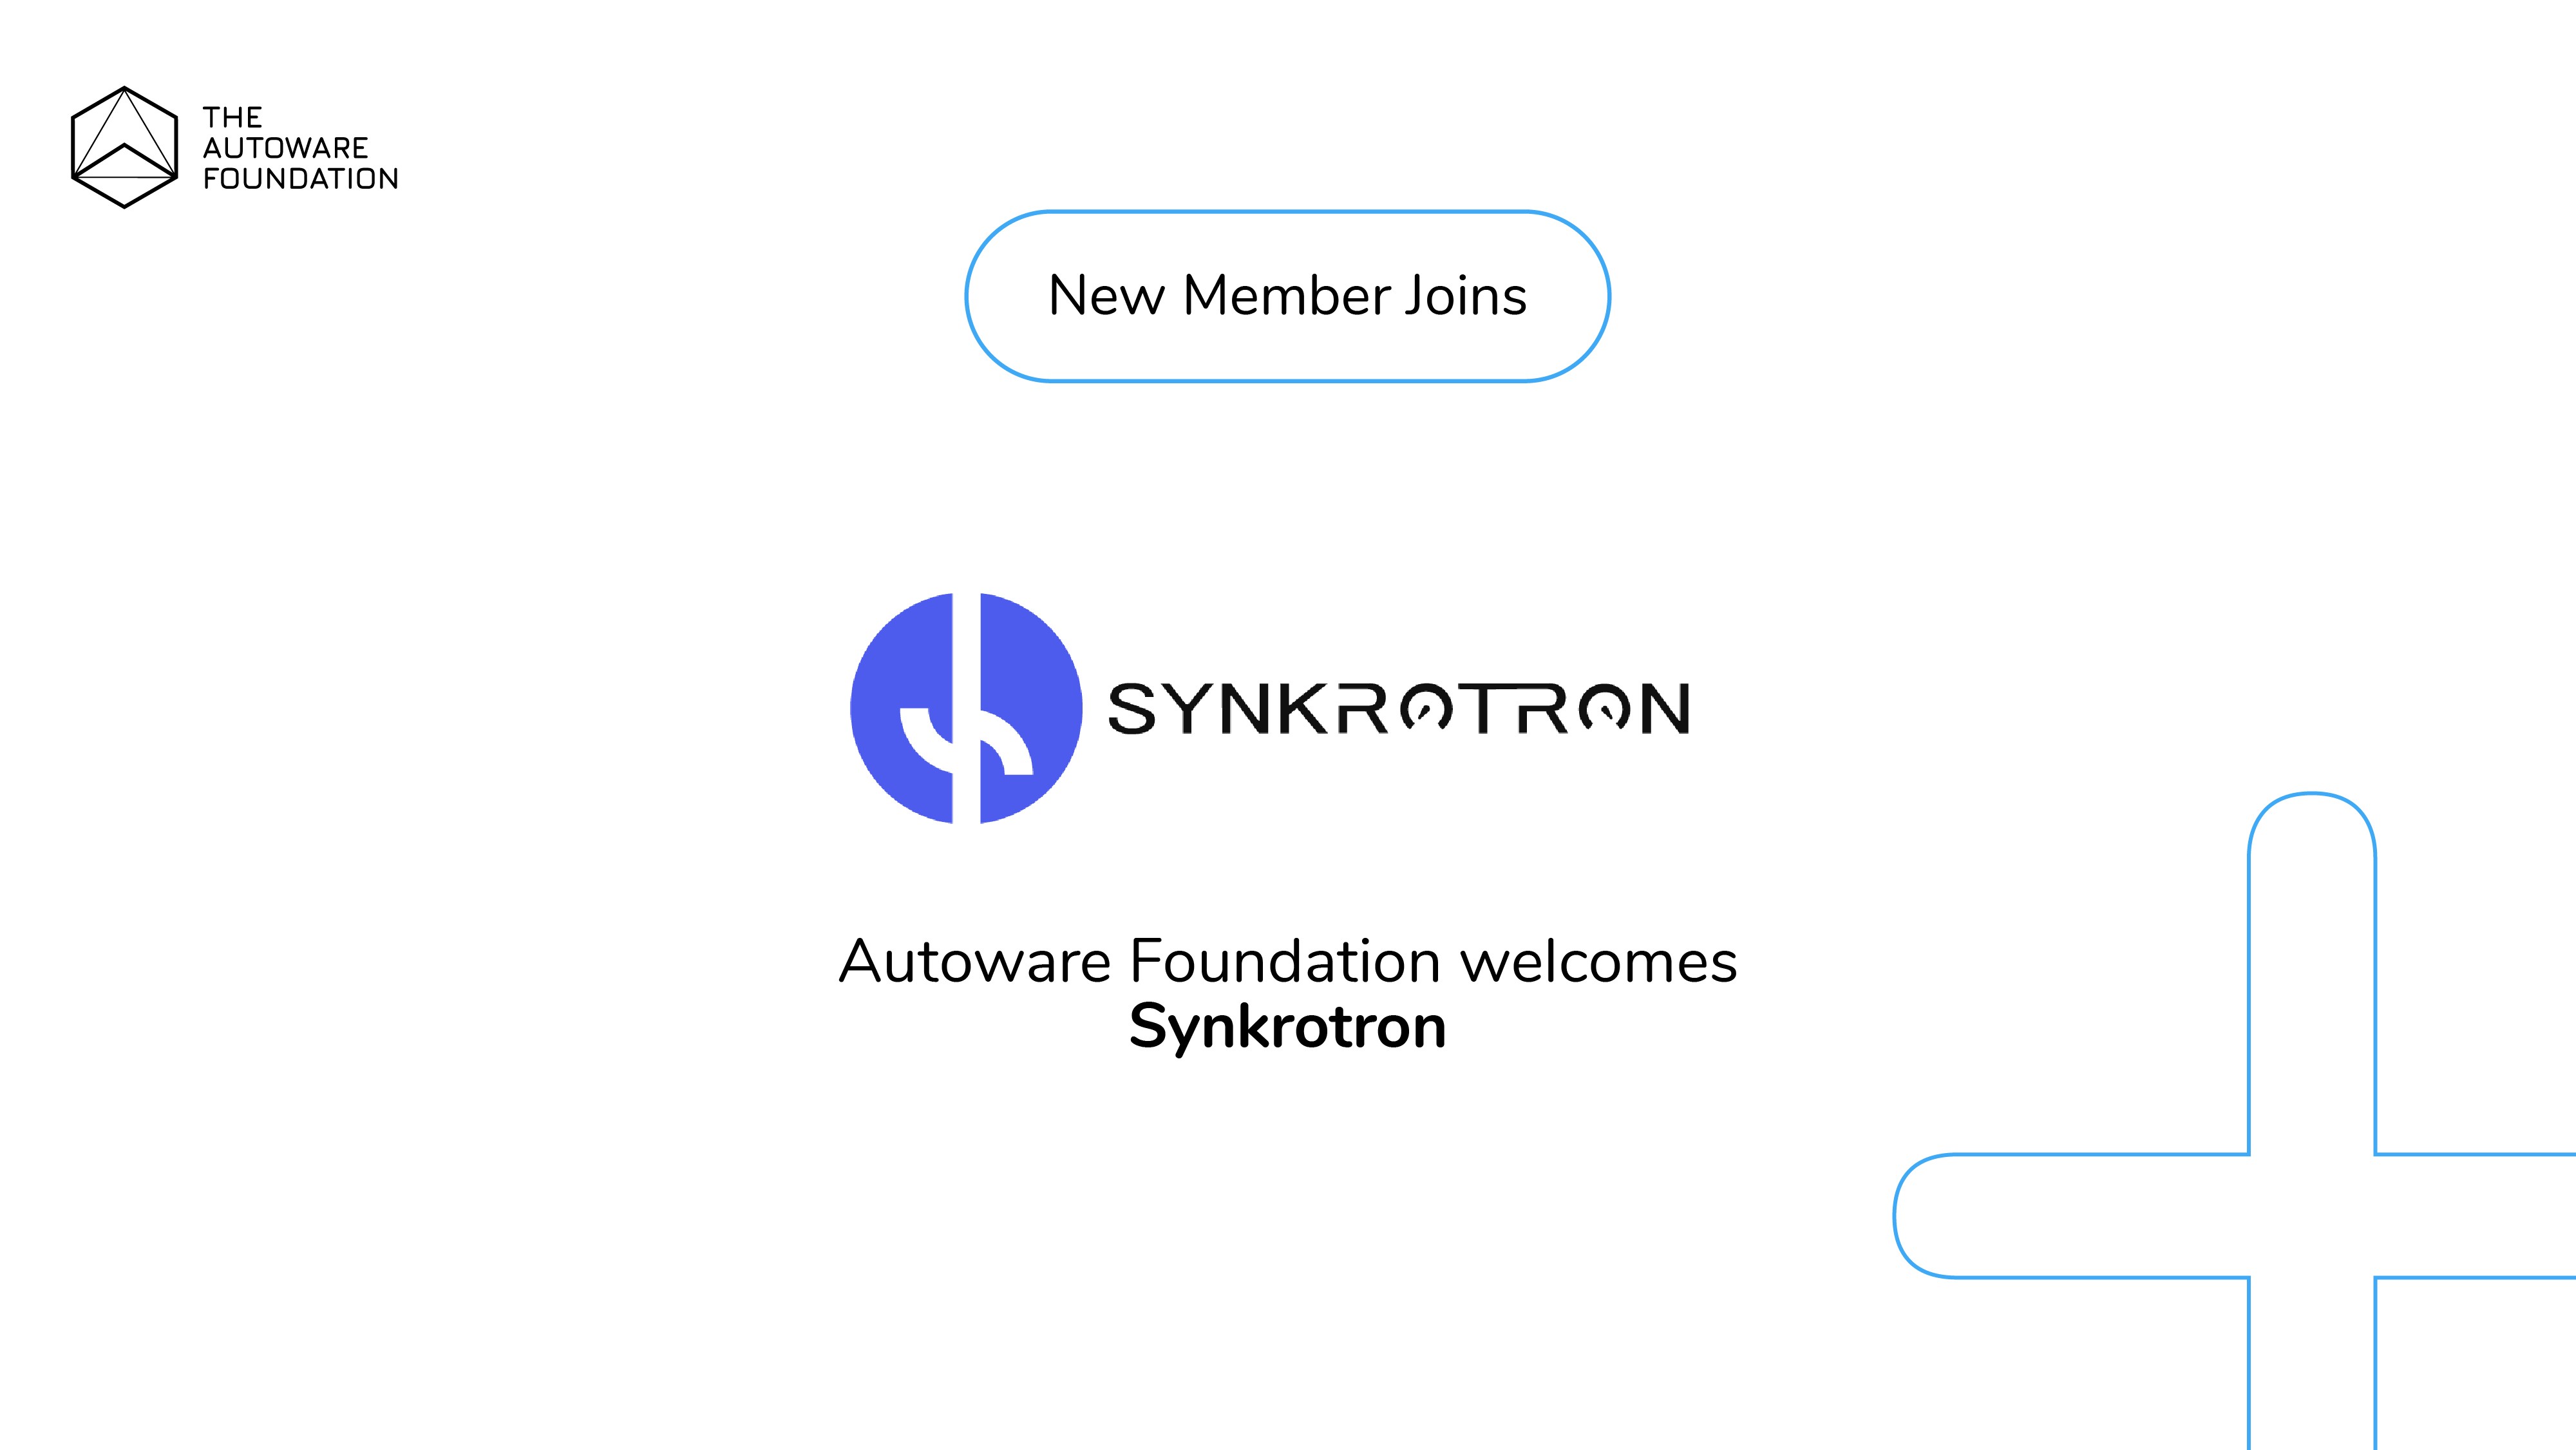 Synkrotron joins the Autoware Foundation!